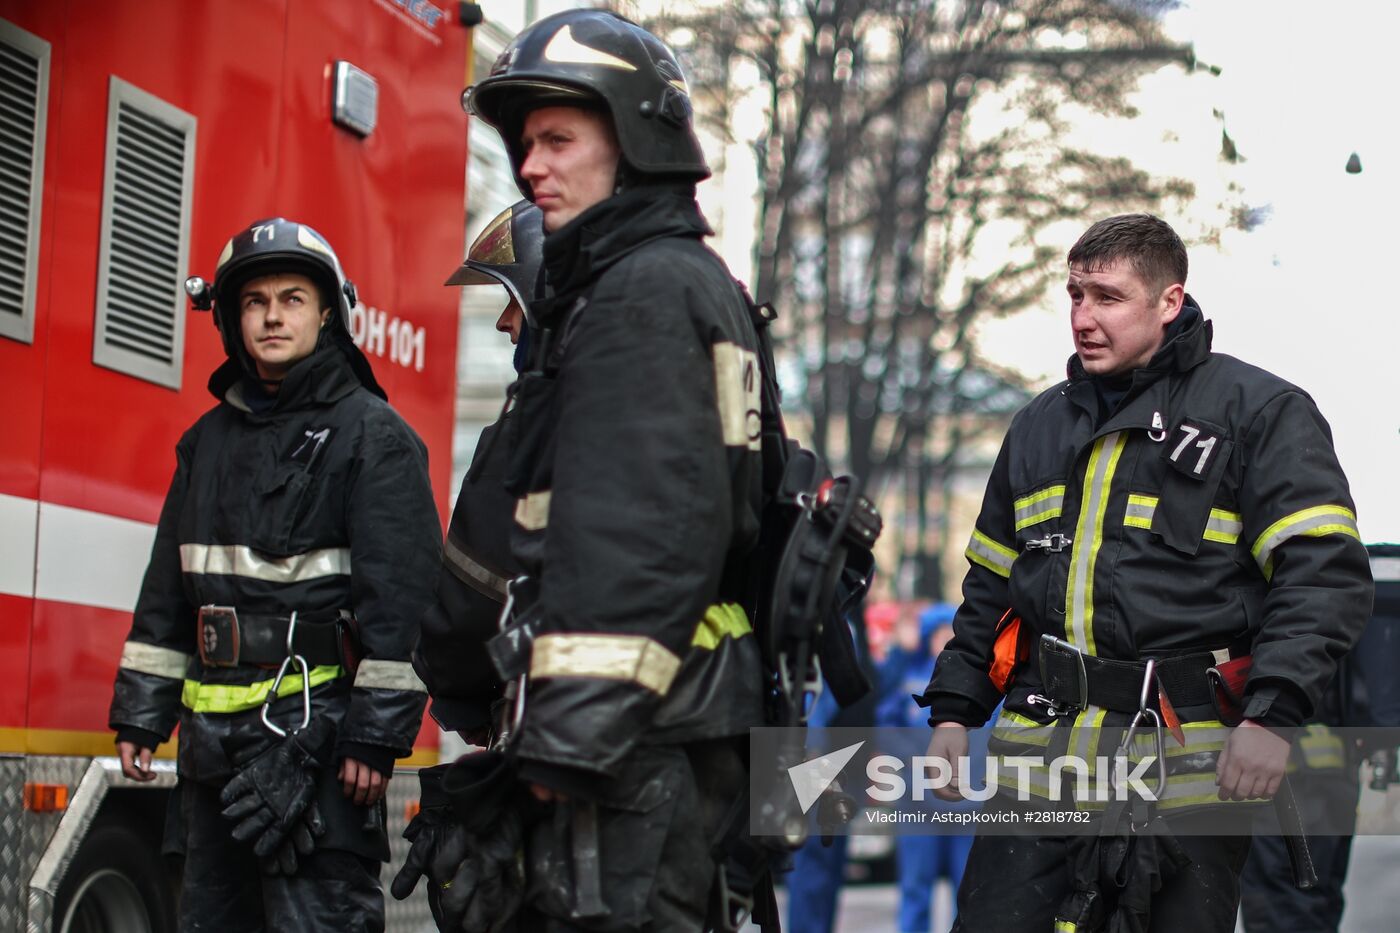 Fire in Defense Ministry building in Moscow